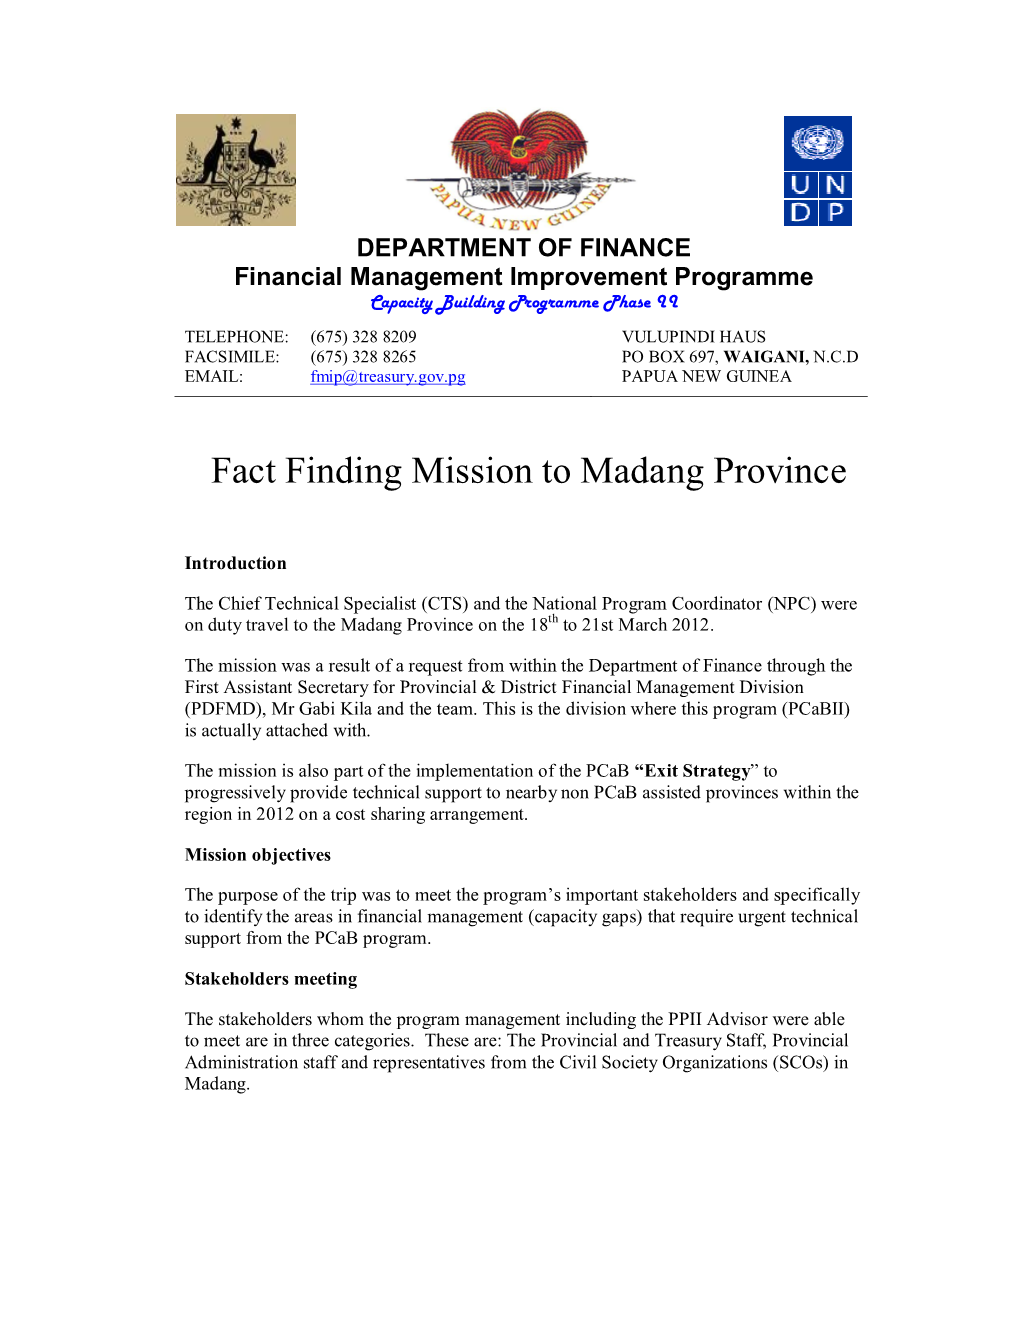 Fact Finding Mission to Madang Province